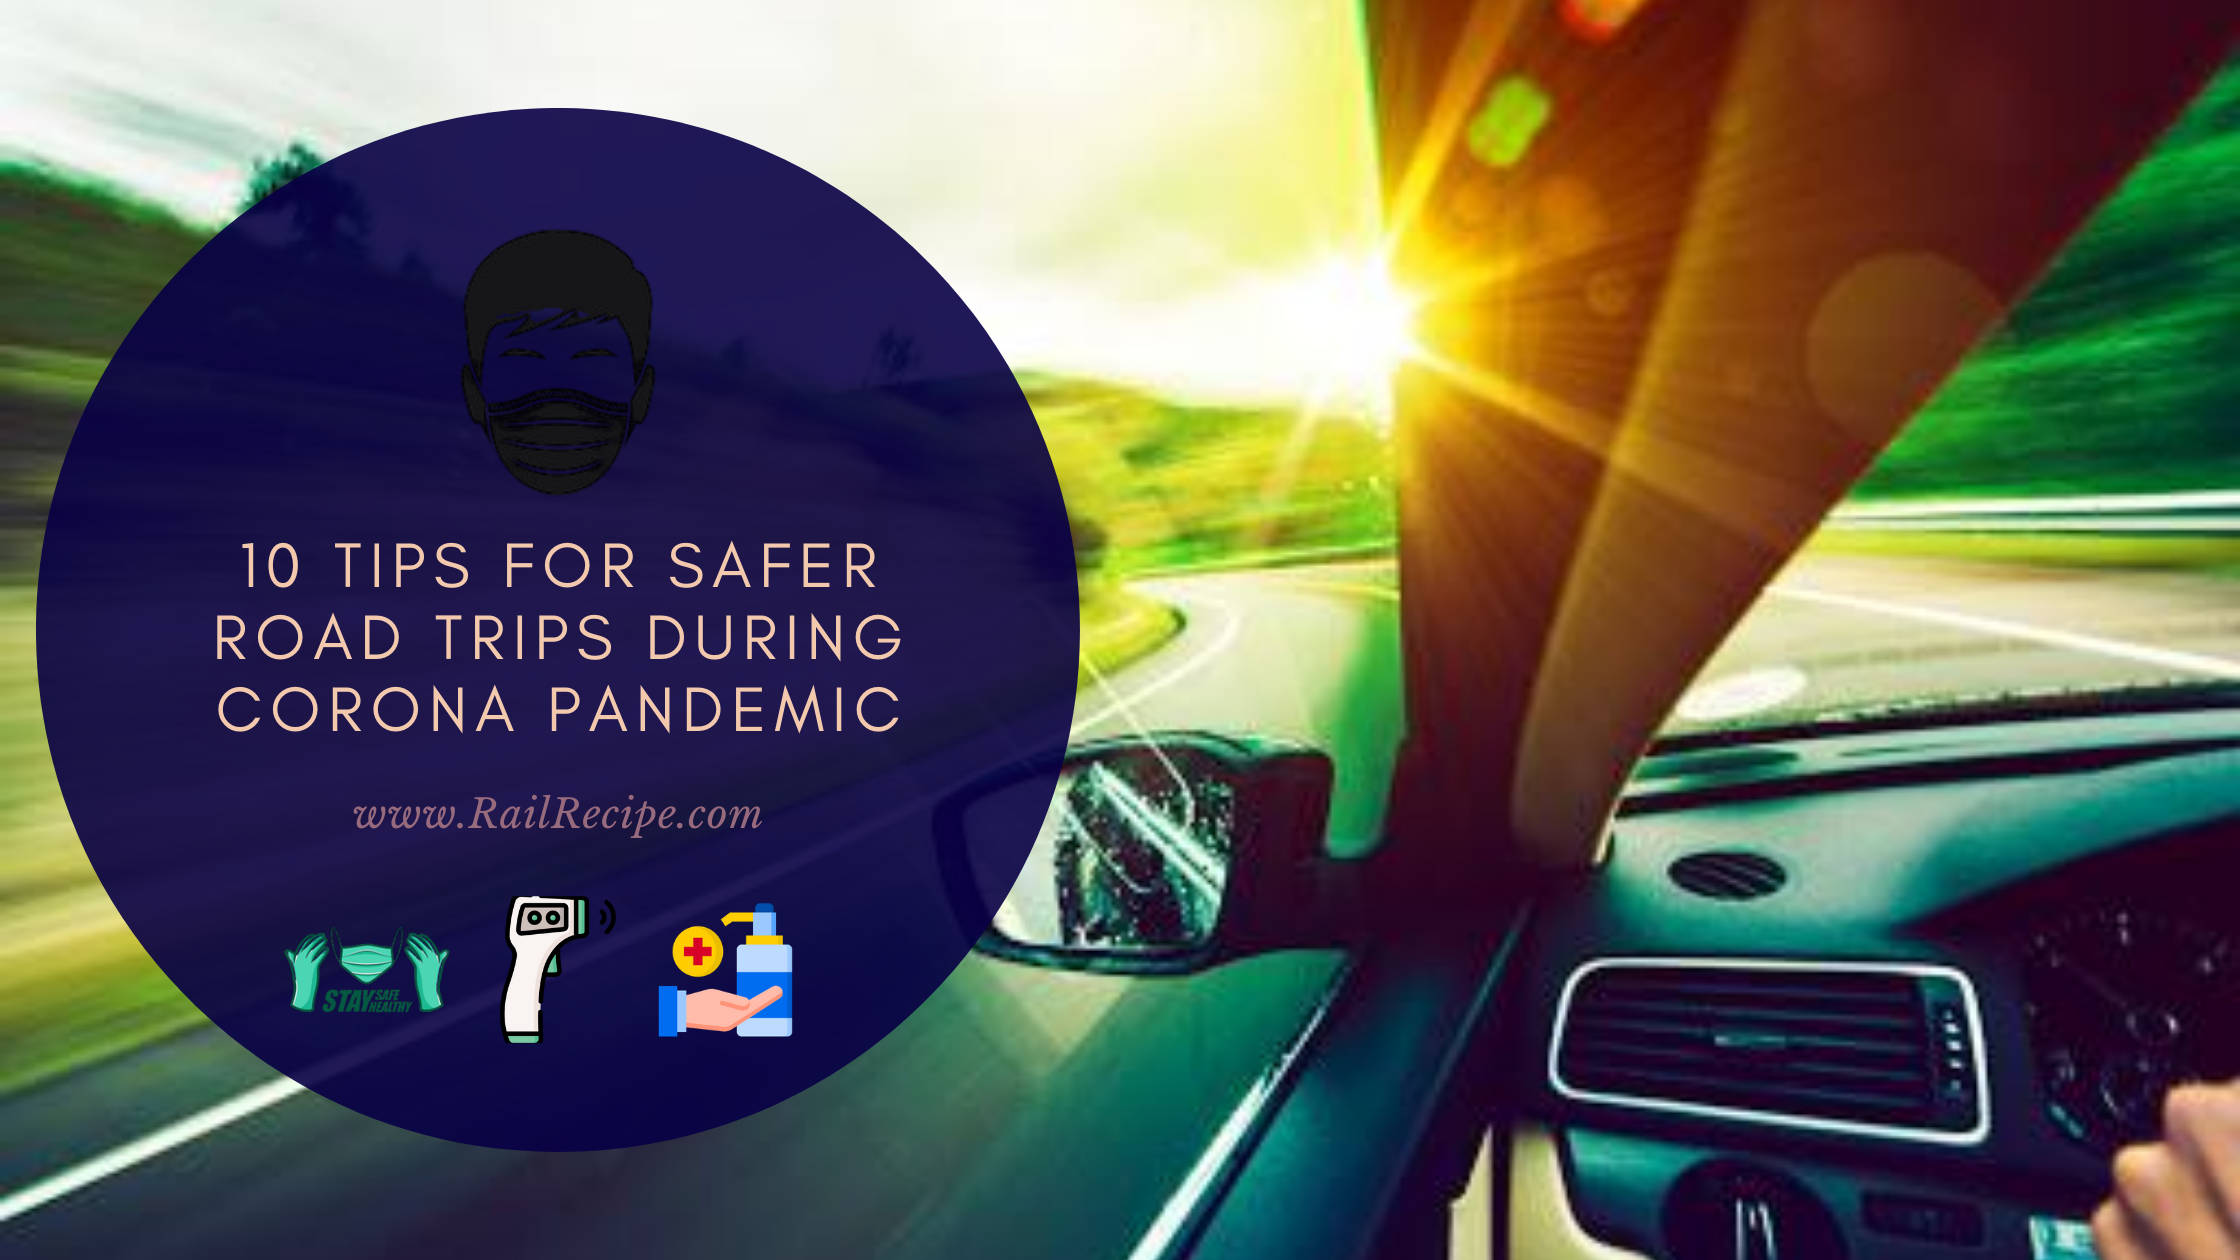 10 Tips For Safer Road Trips During Corona Pandemic